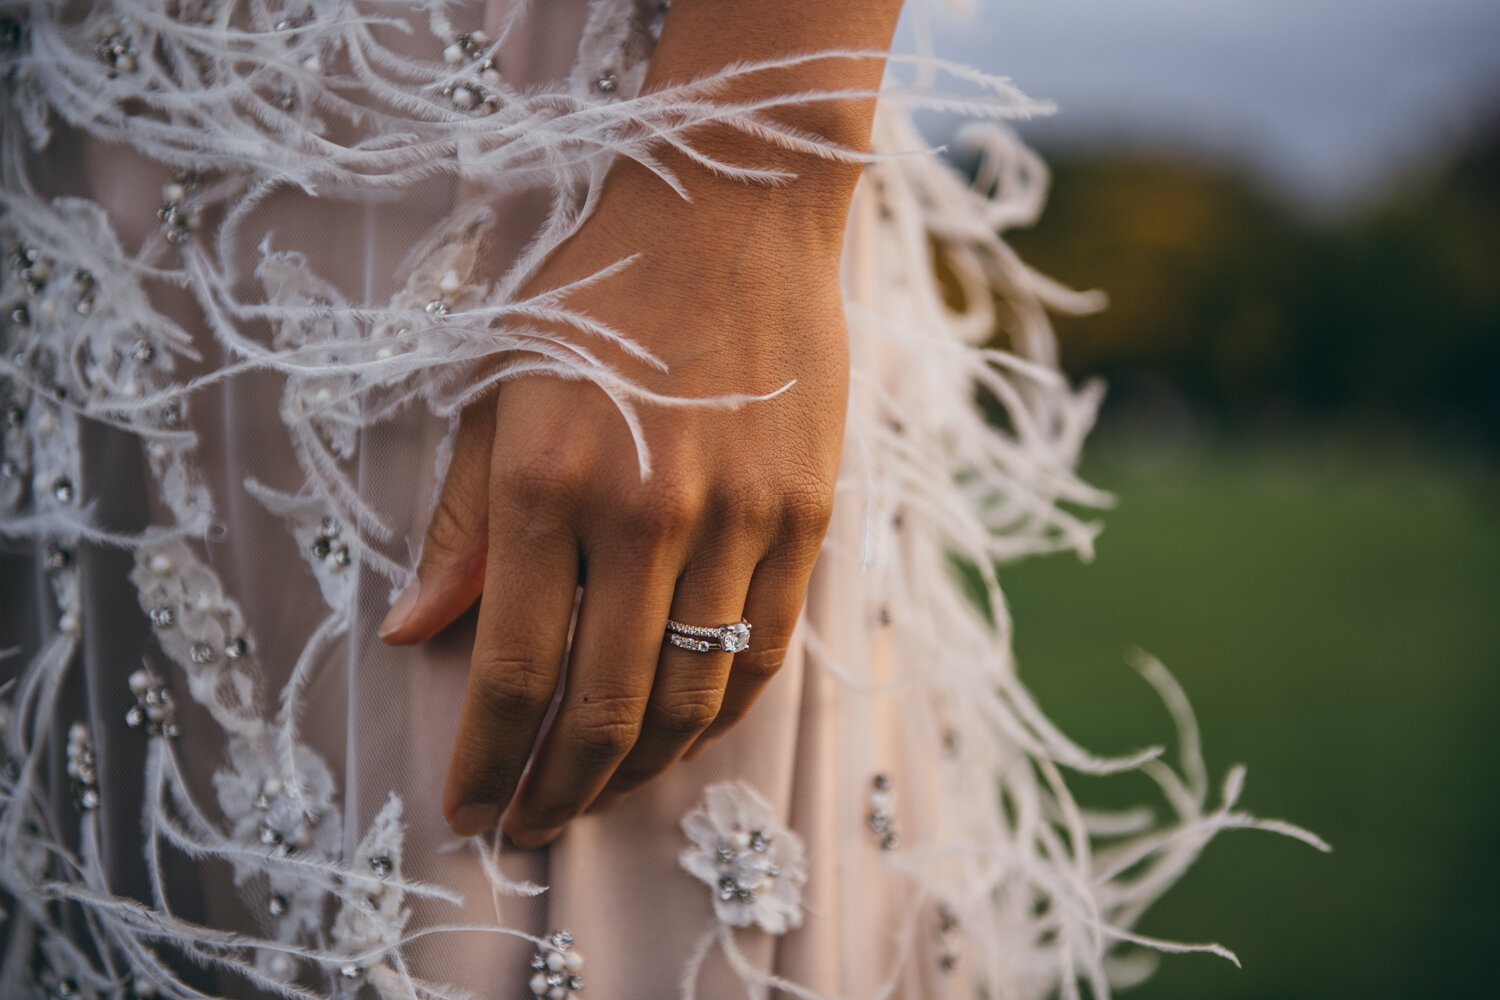 Close-up image of a hand with a wedding ring on it and a feathery dress blowing in the wind.

Central Park Wedding Photography. Williamsburg Bridge Bridal Portraits. Luxury NYC Wedding Photographer. Manhattan Micro Wedding.